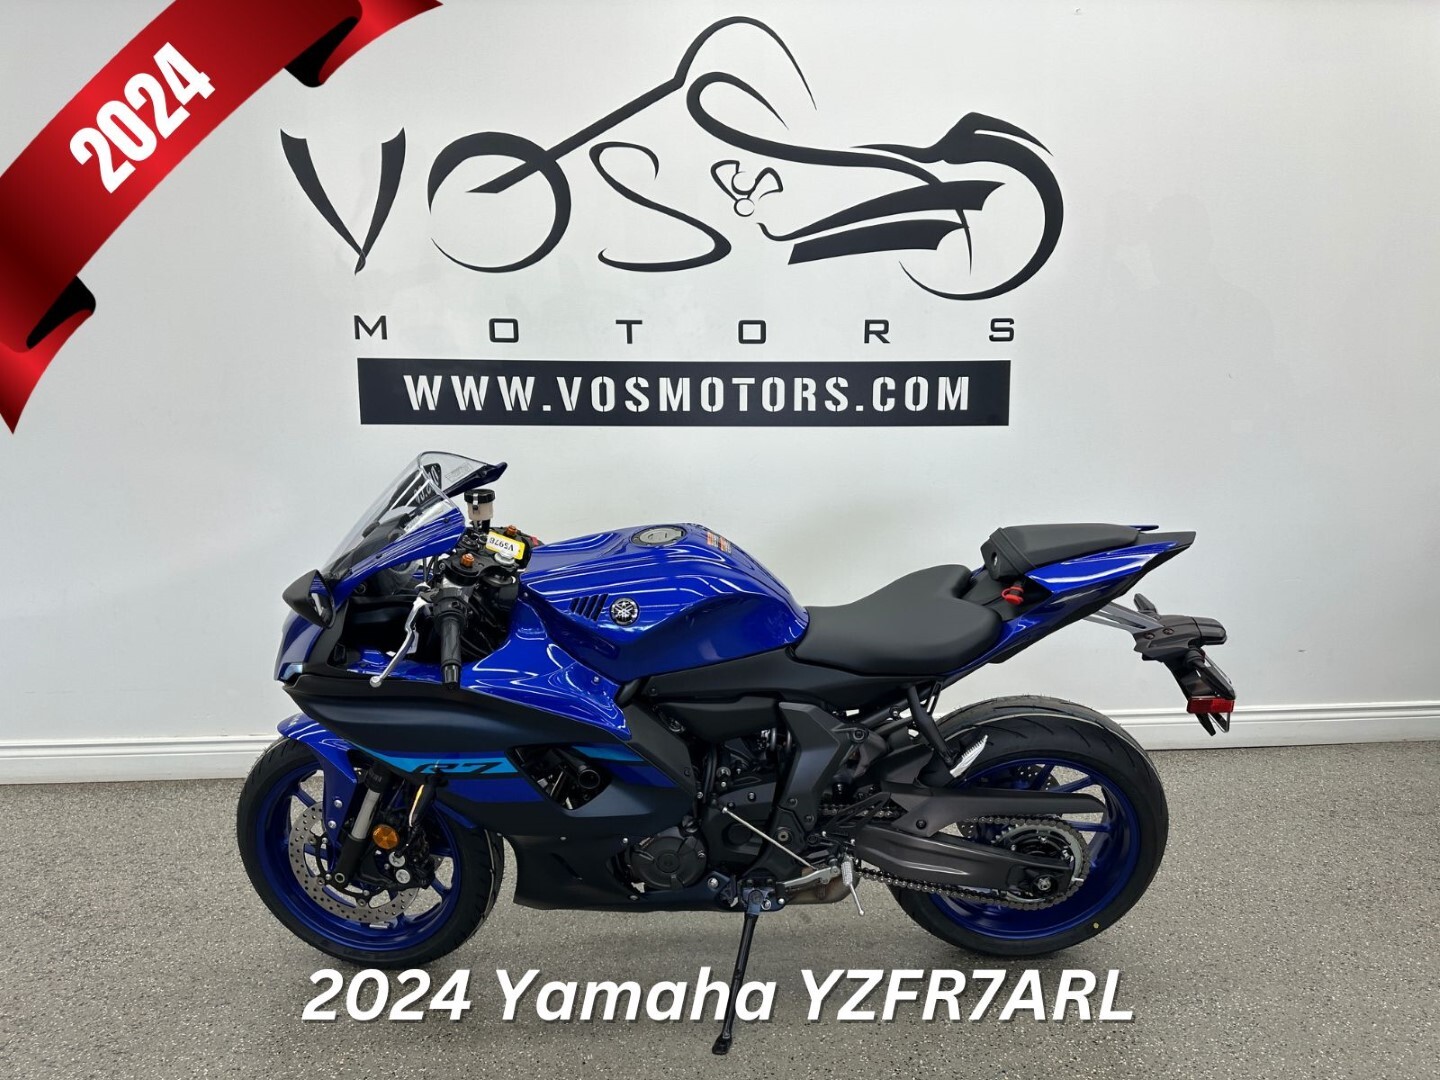 2024 Yamaha YZFR7ARL YZFR7ARL - V6017NP - -No Payments for 1 Year**